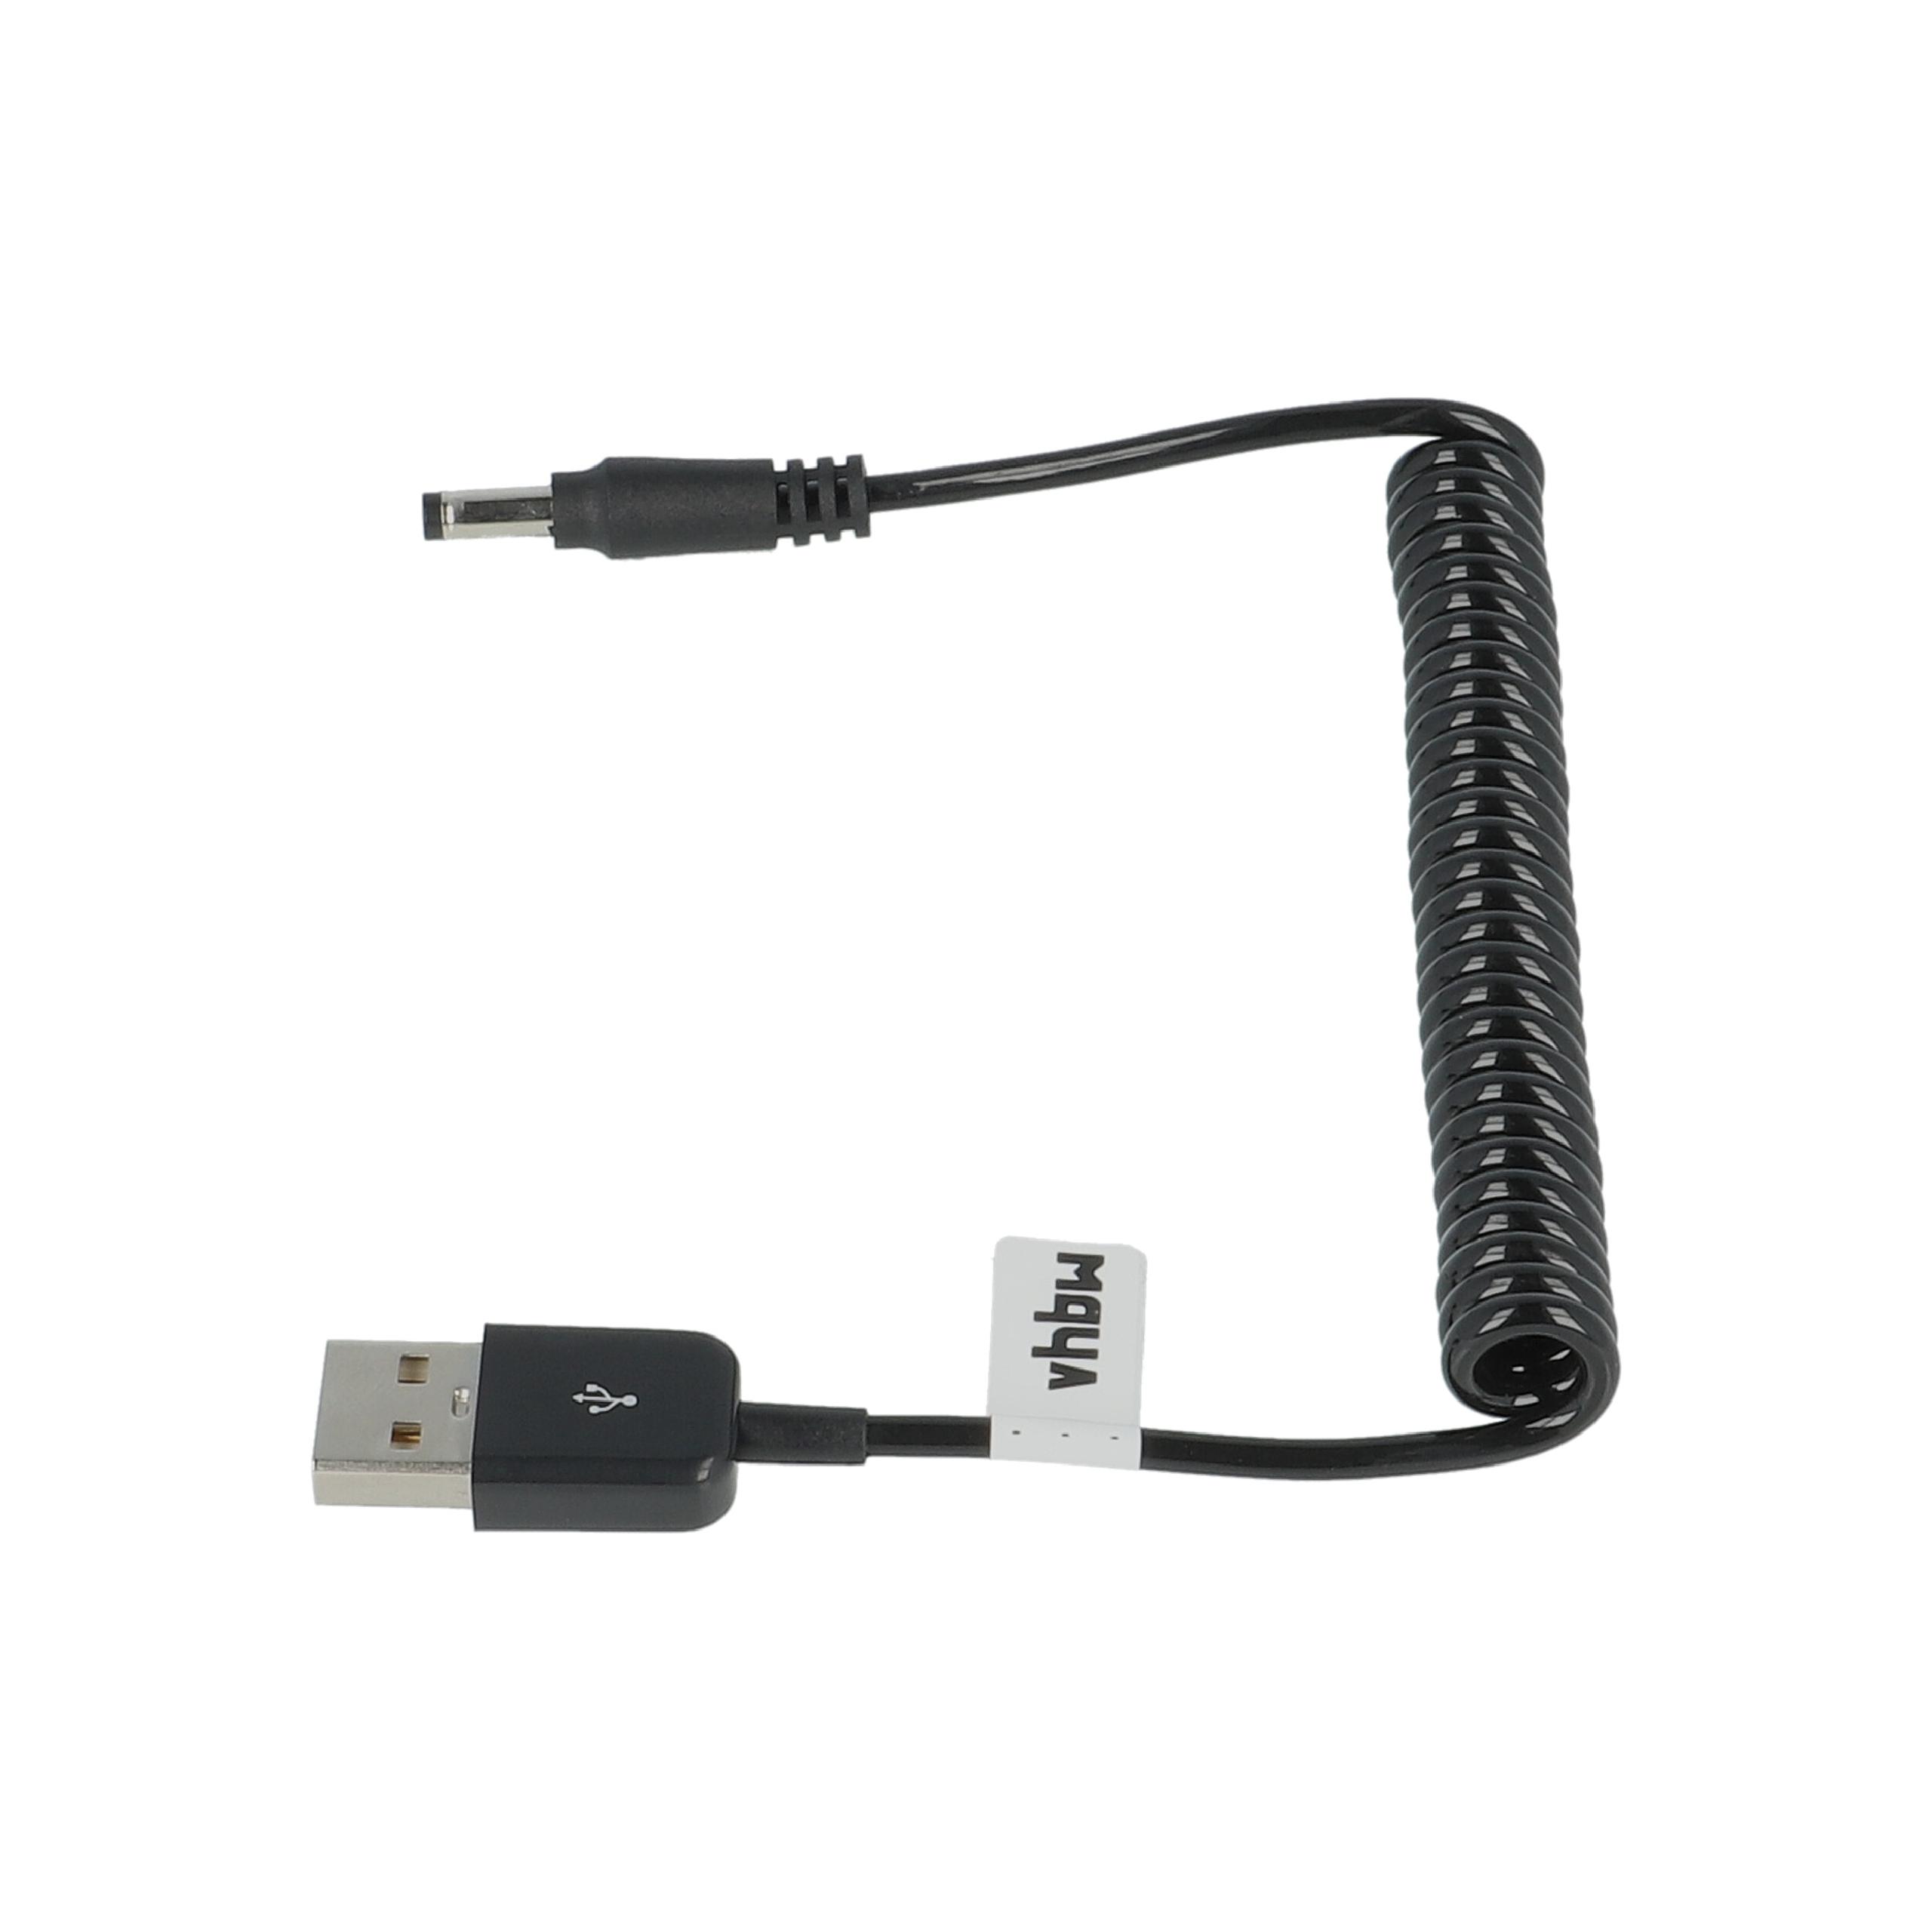 USB Charging Cable replaces Panasonic K2GHYYS00002 for Panasonic Camera, Video Camera, Camcorder - 1 m